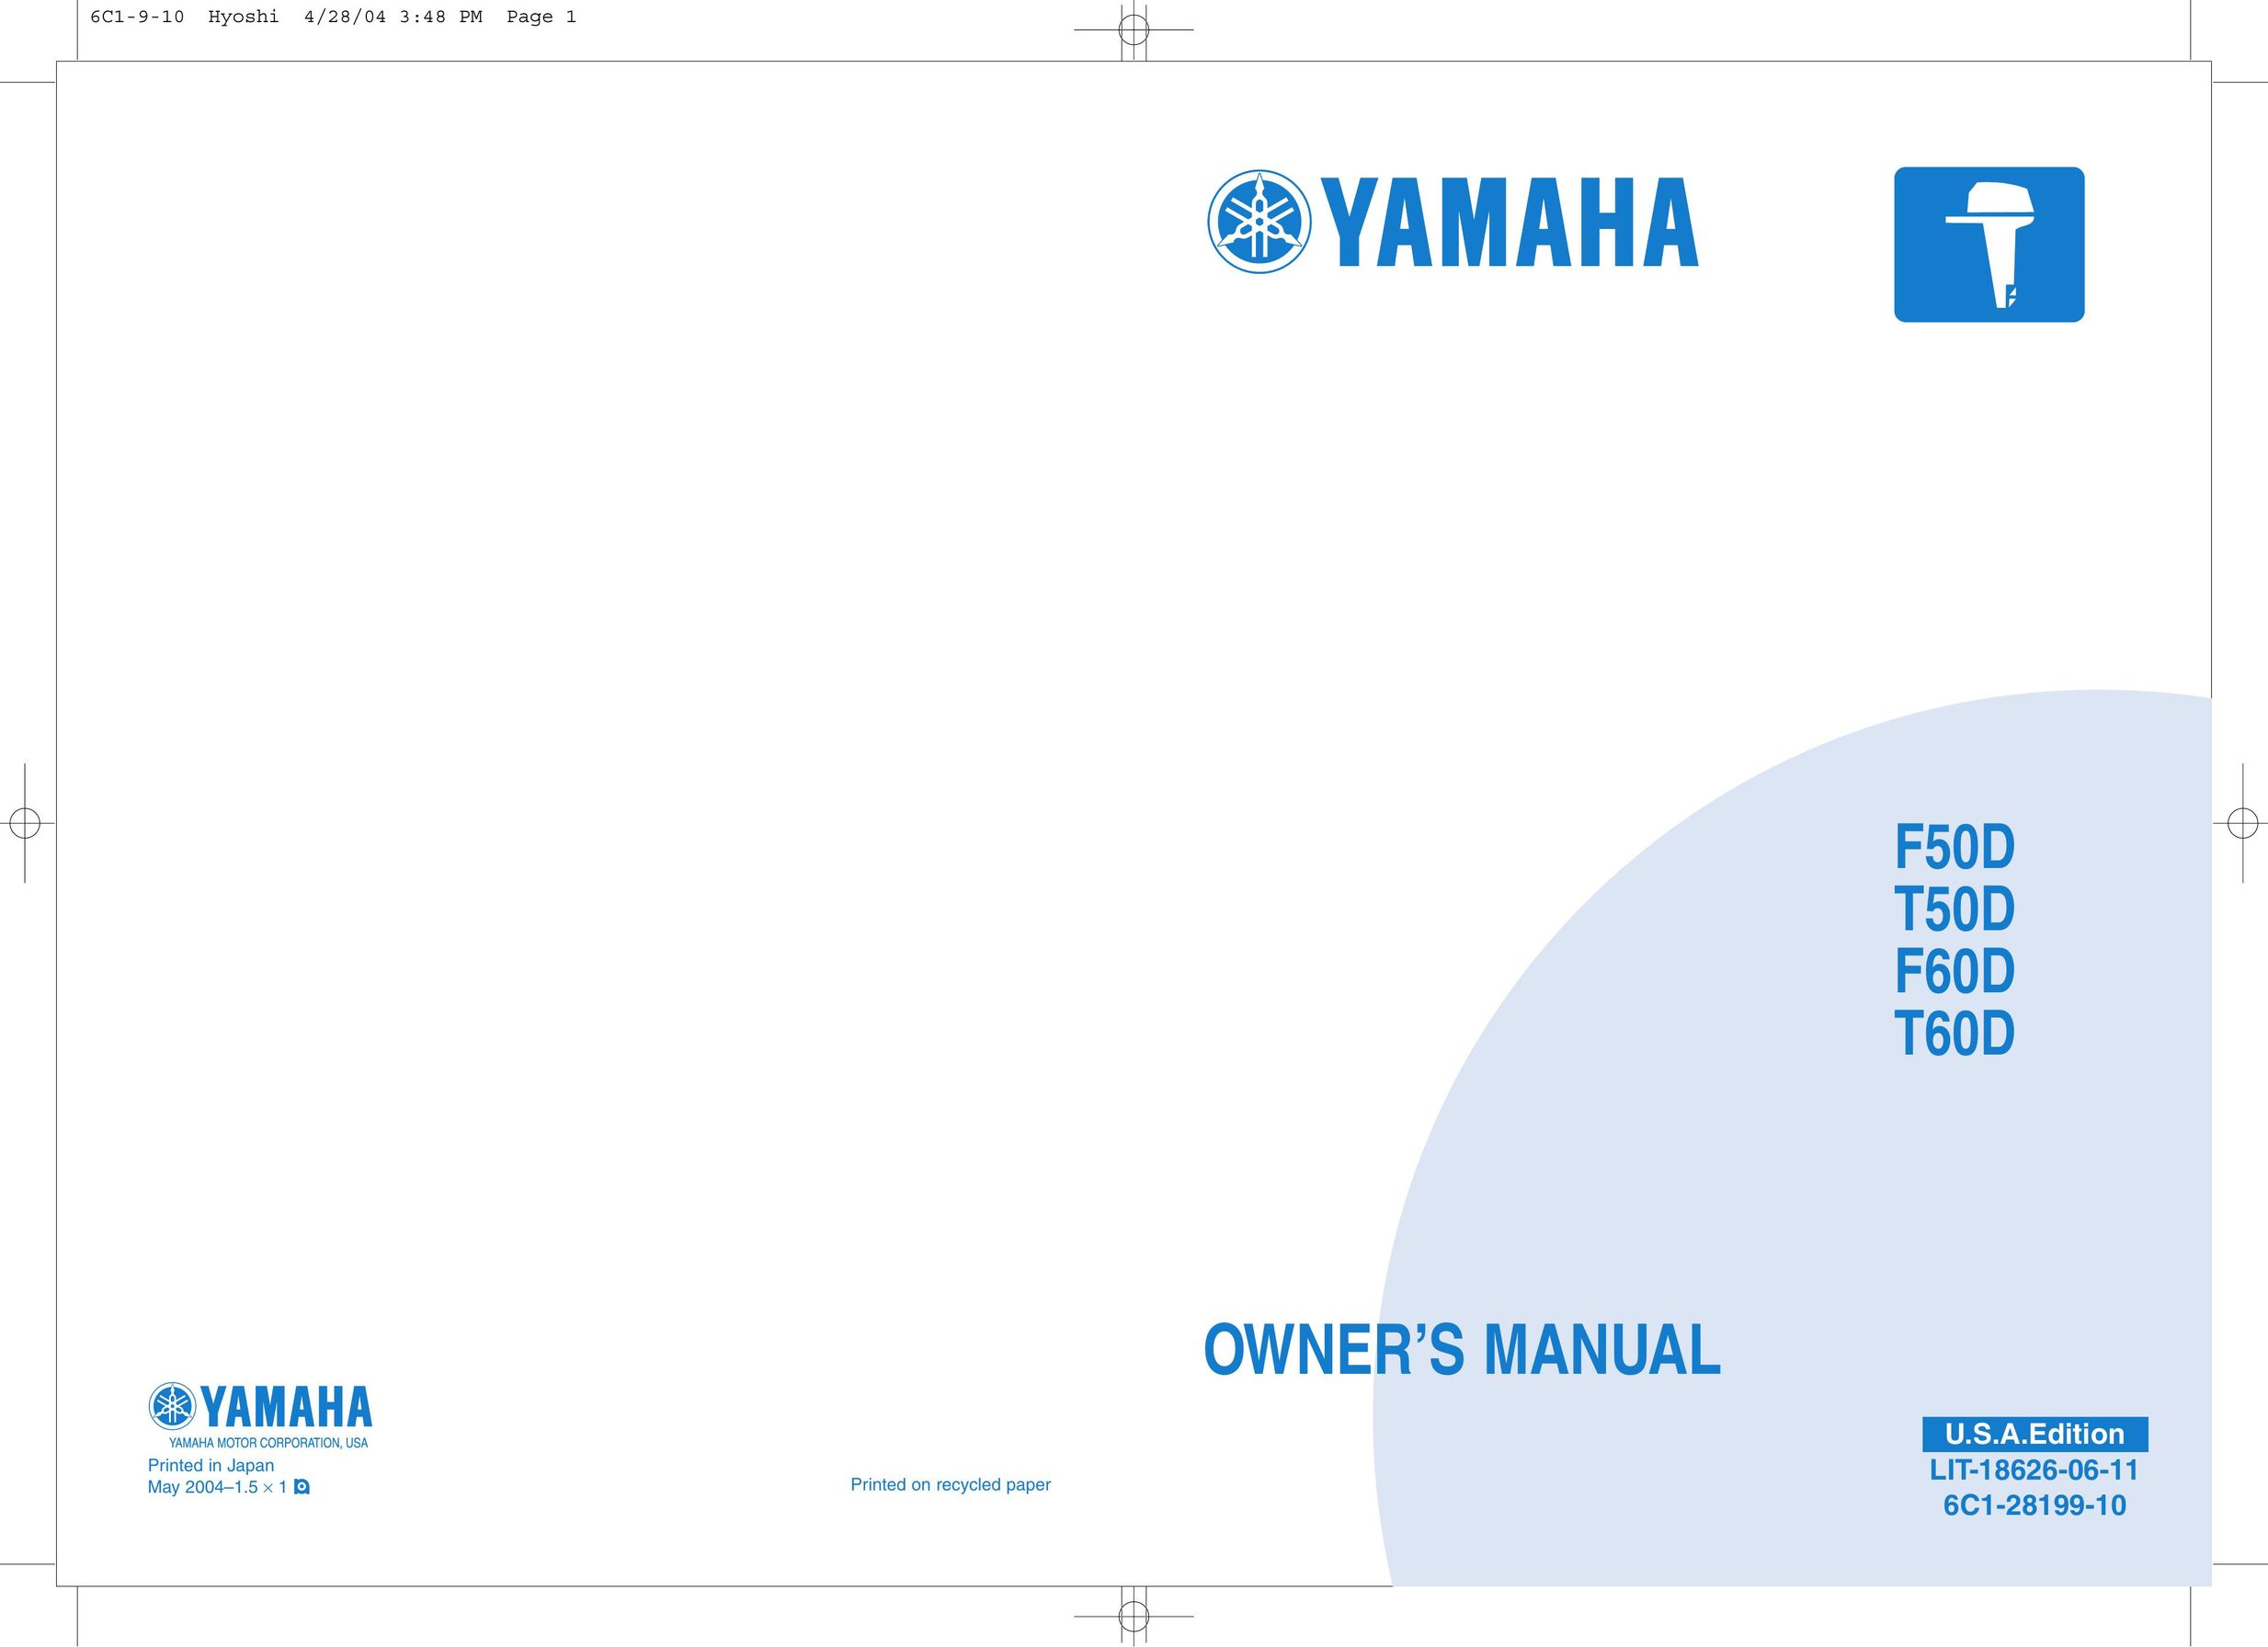 Yamaha F60D Network Router User Manual